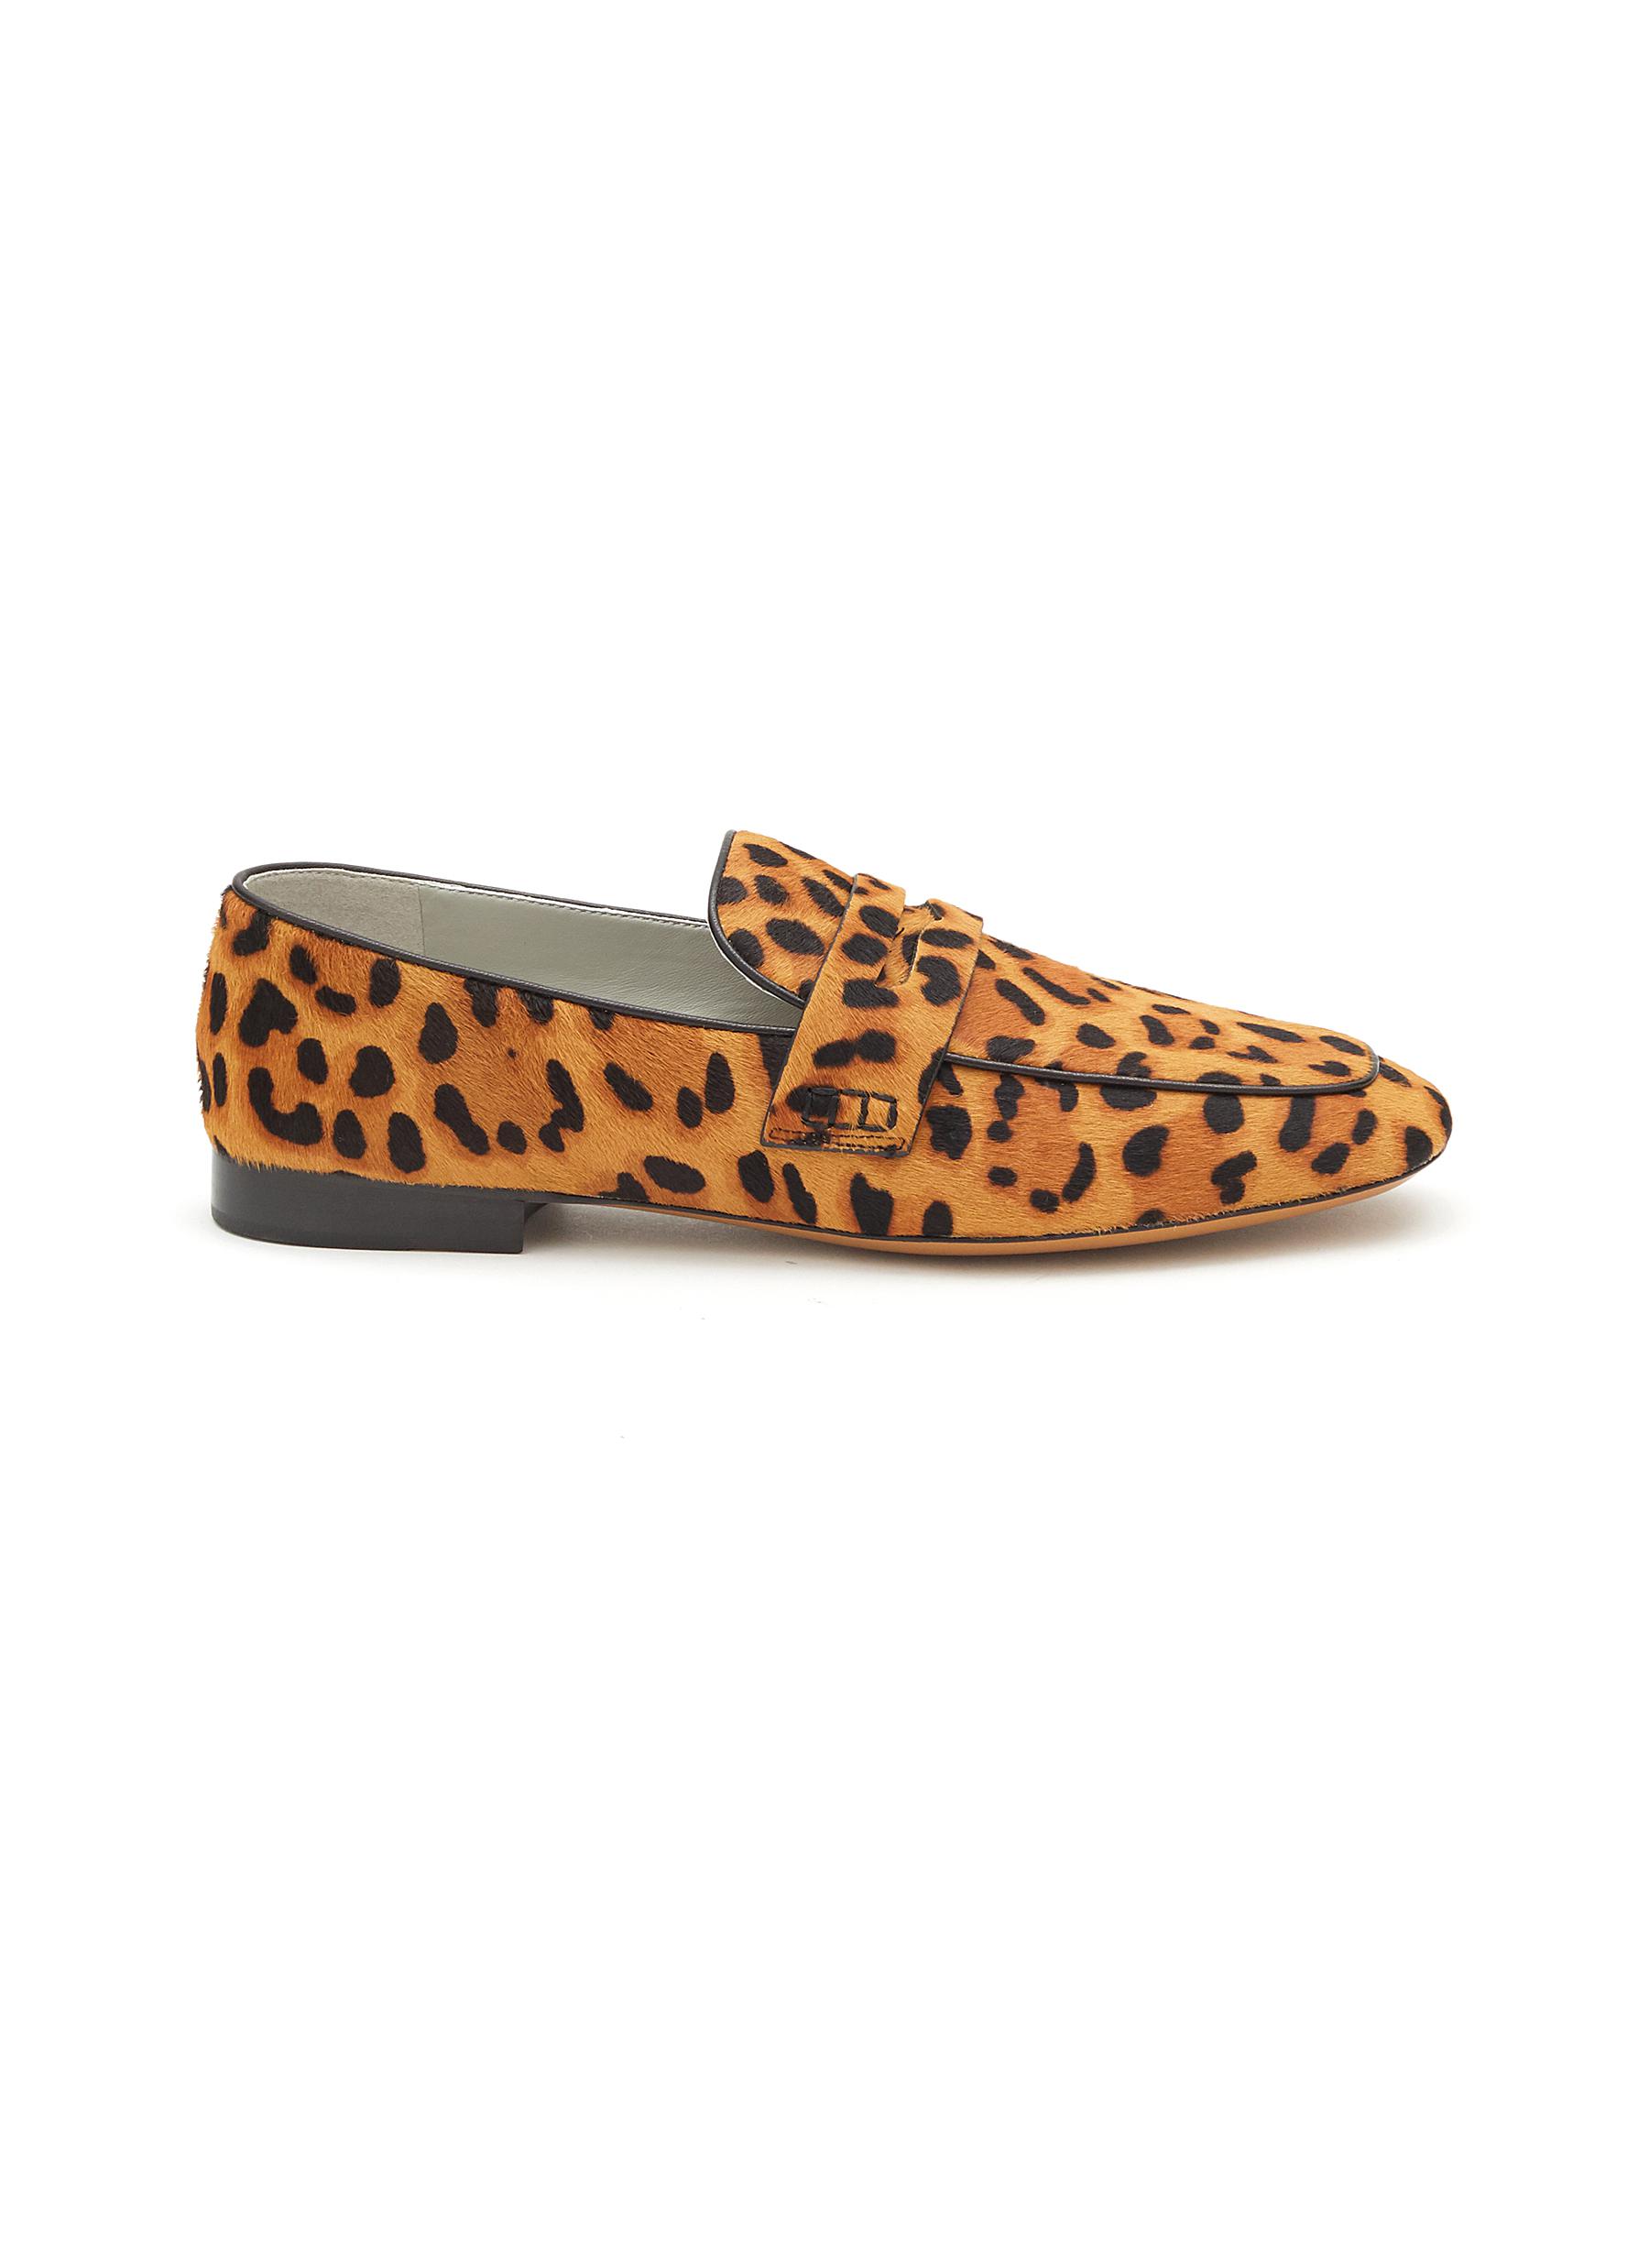 EQUIL ‘London' Leopard Print Leather Penny Loafers